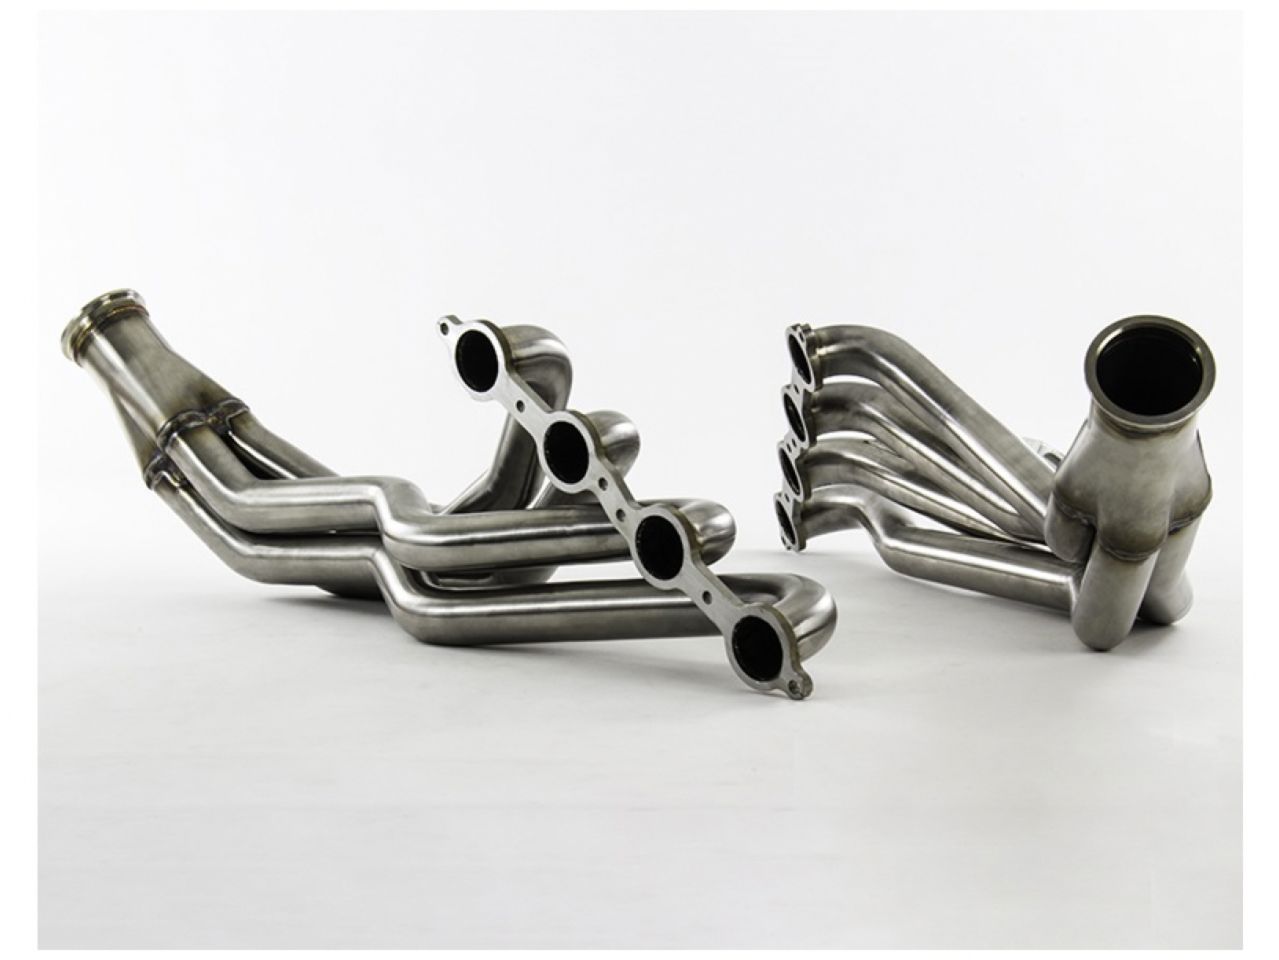 Sikky Nissan 240sx S13/S14/S15 LS Swap Headers 1 7/8" Stainless Steel